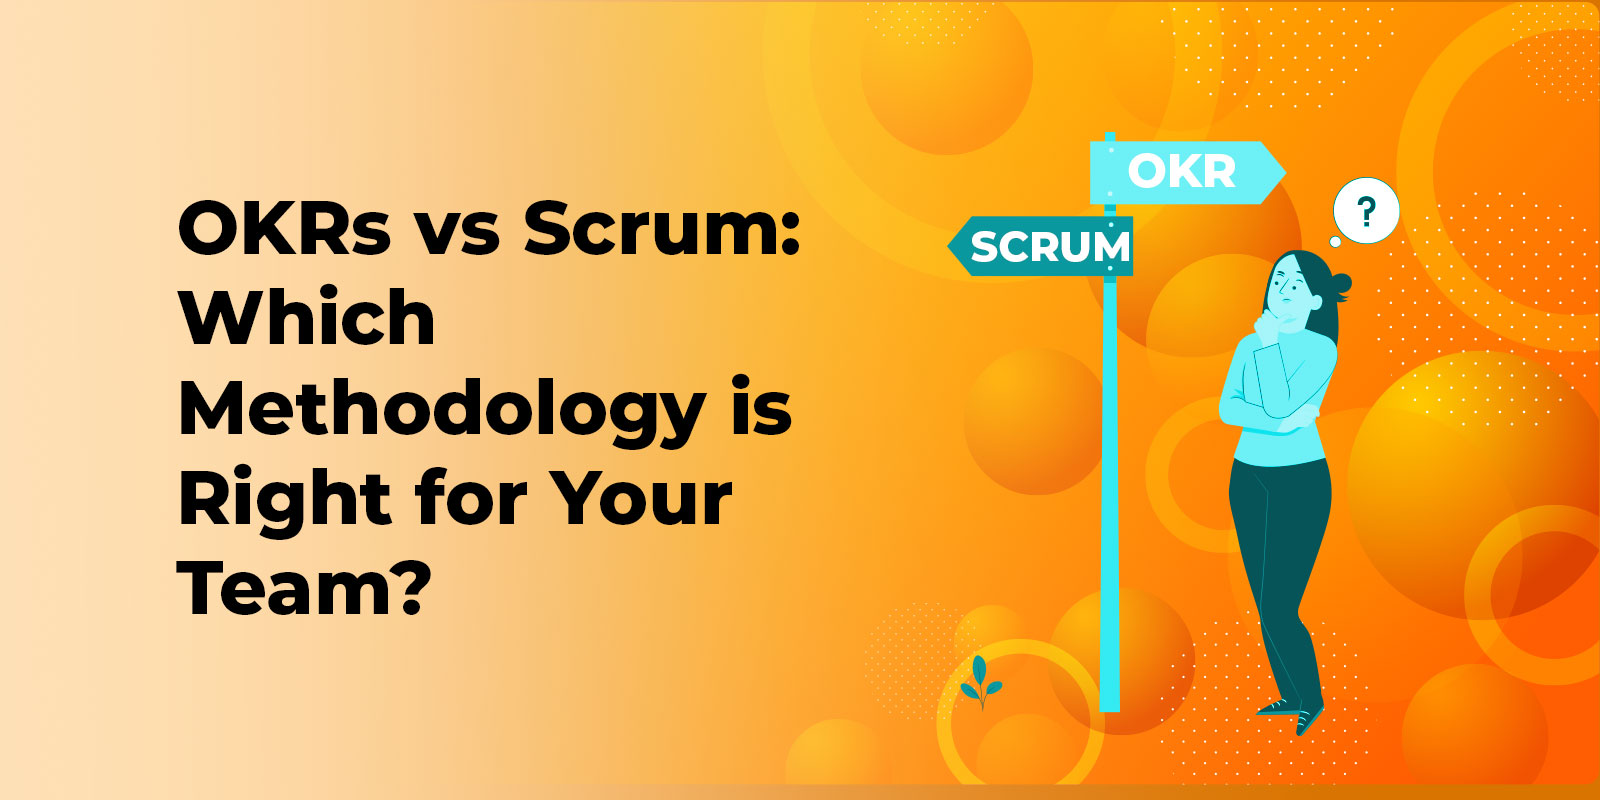 OKR vs Scrum: Which is Best for Your Business?